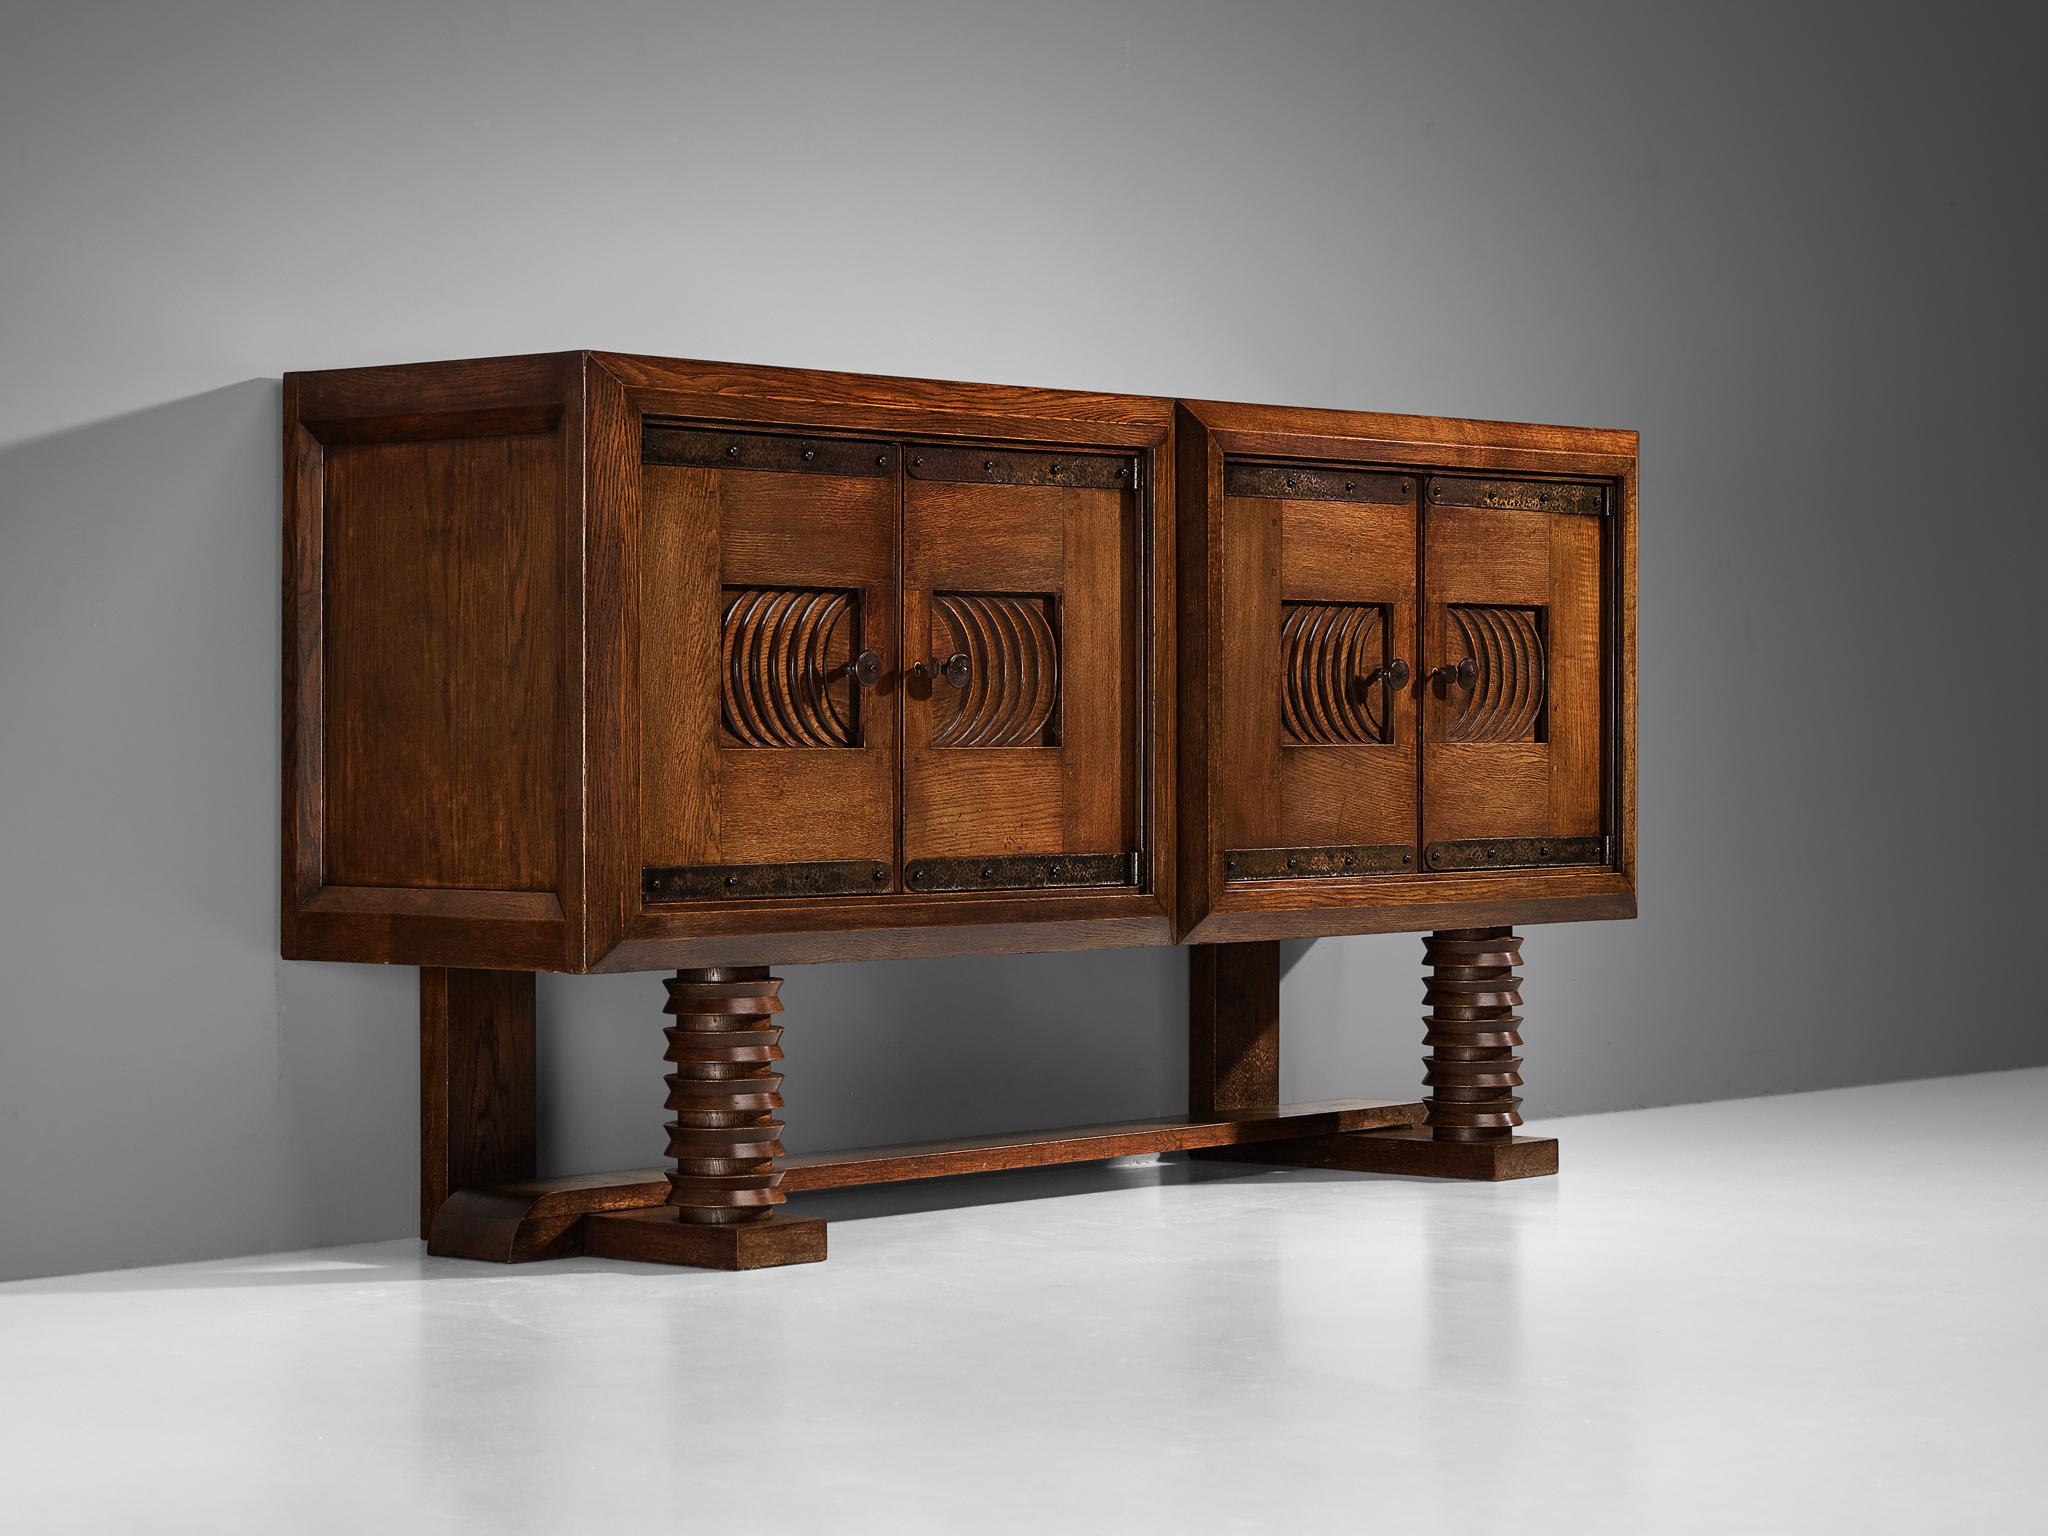  Parisian Art Deco Sideboard in Solid Oak with Iron Elements For Sale 1